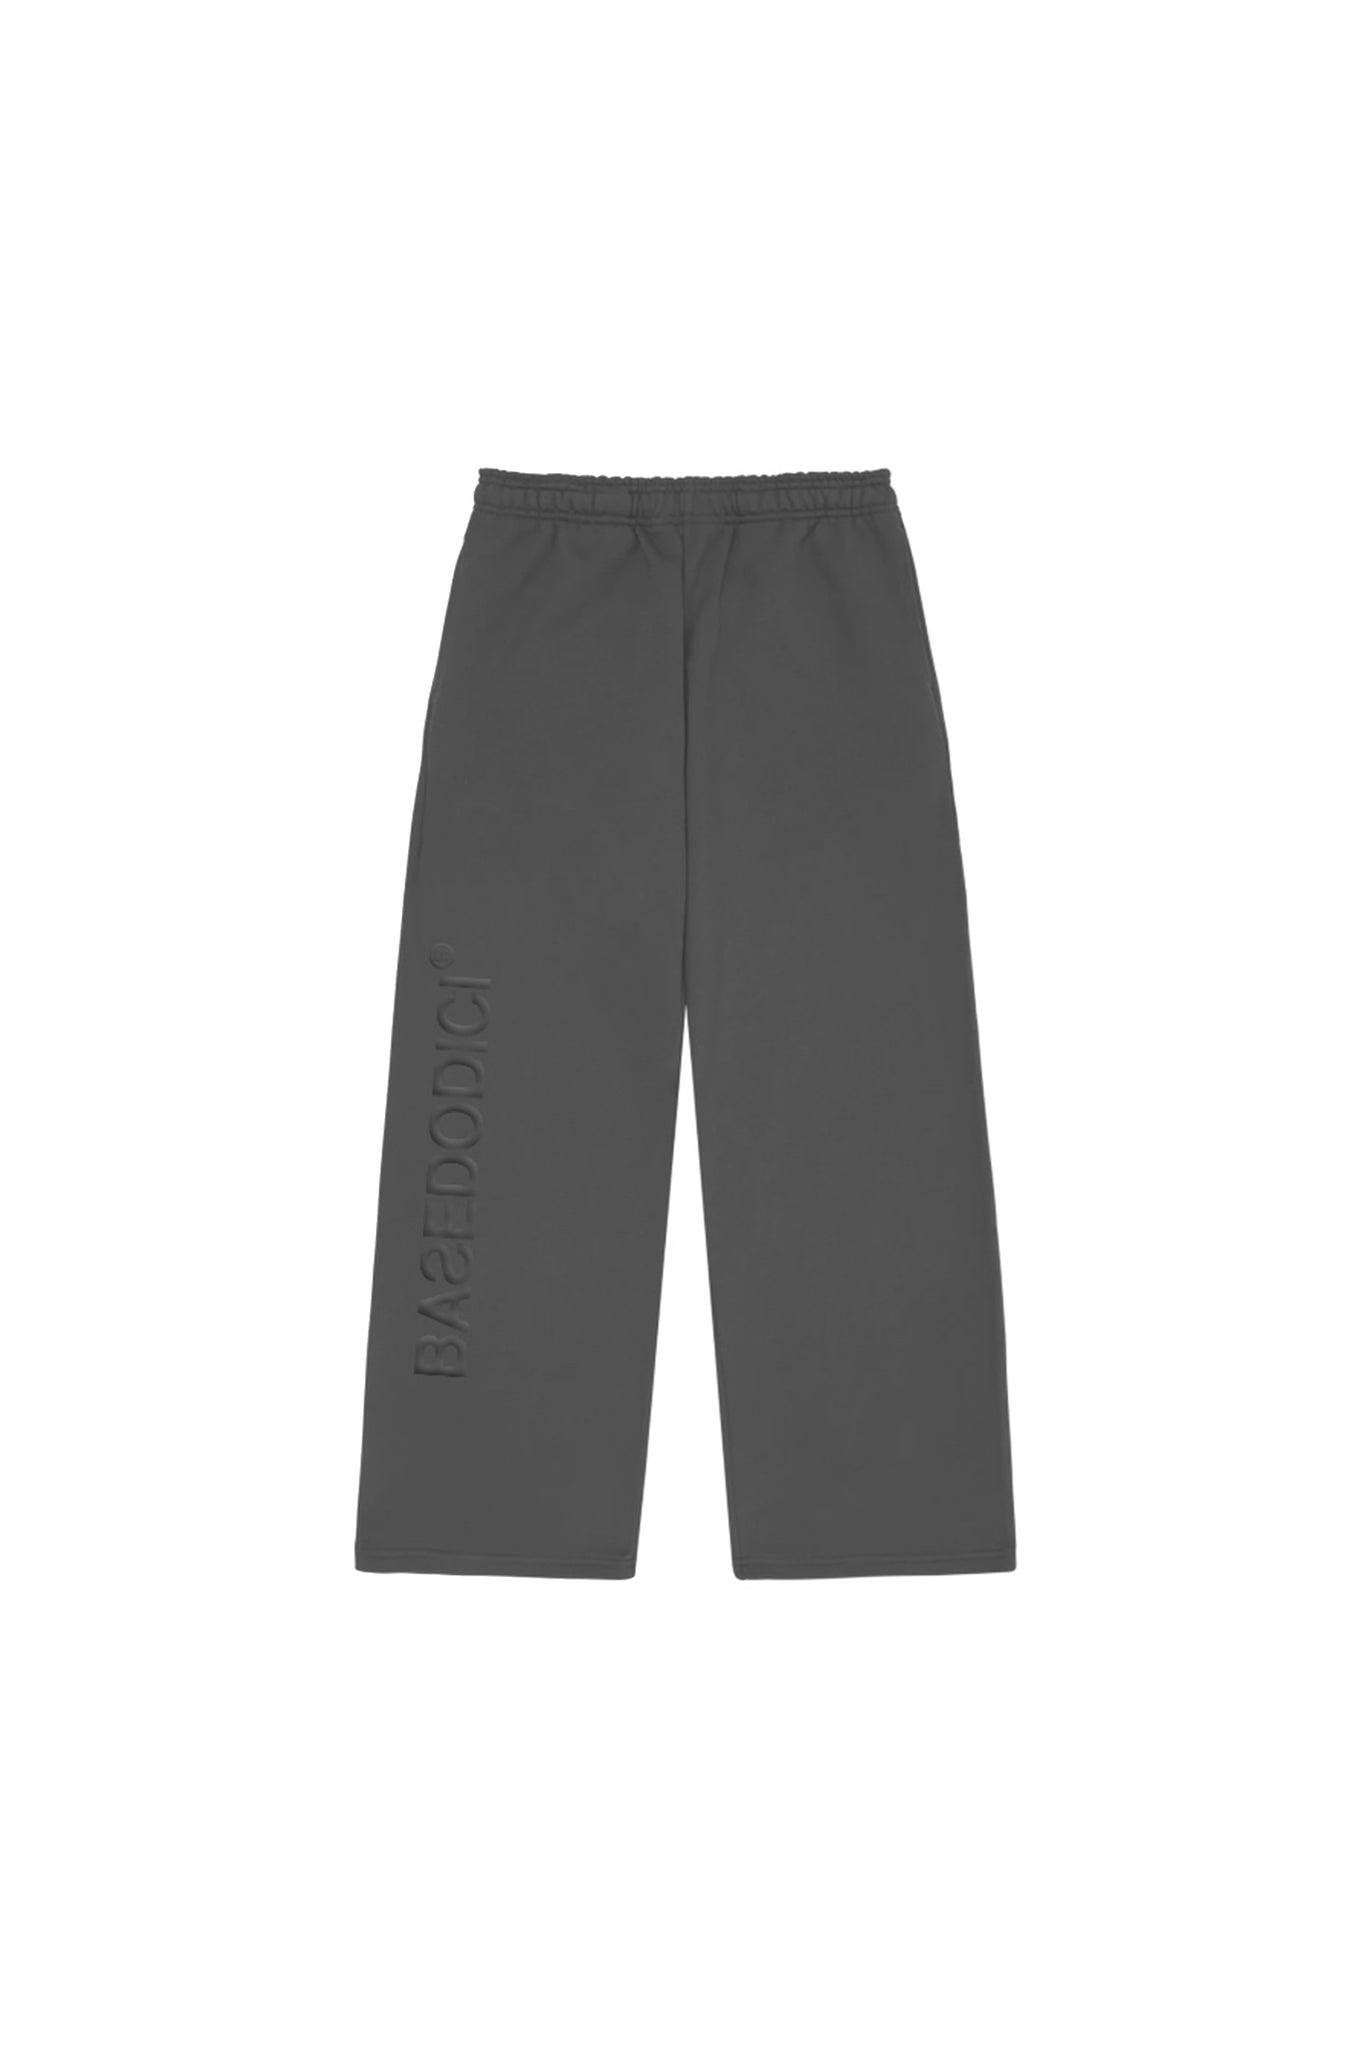 Suitpants Bigall "TEAM012" Charcoal Grey